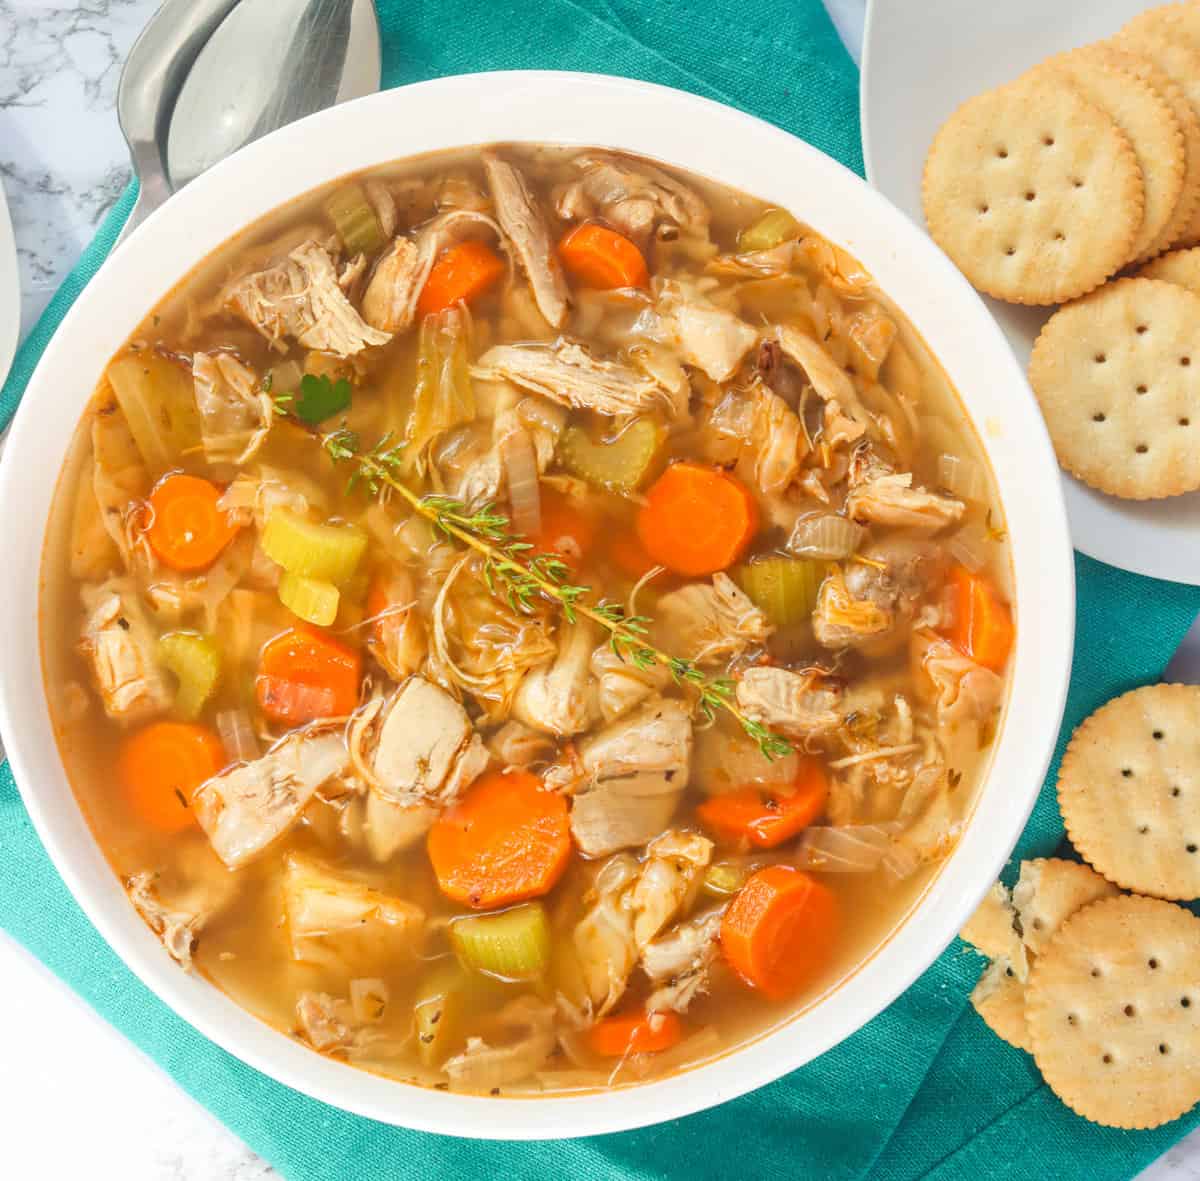 Chicken cabbage soup full of flavor and nutrition